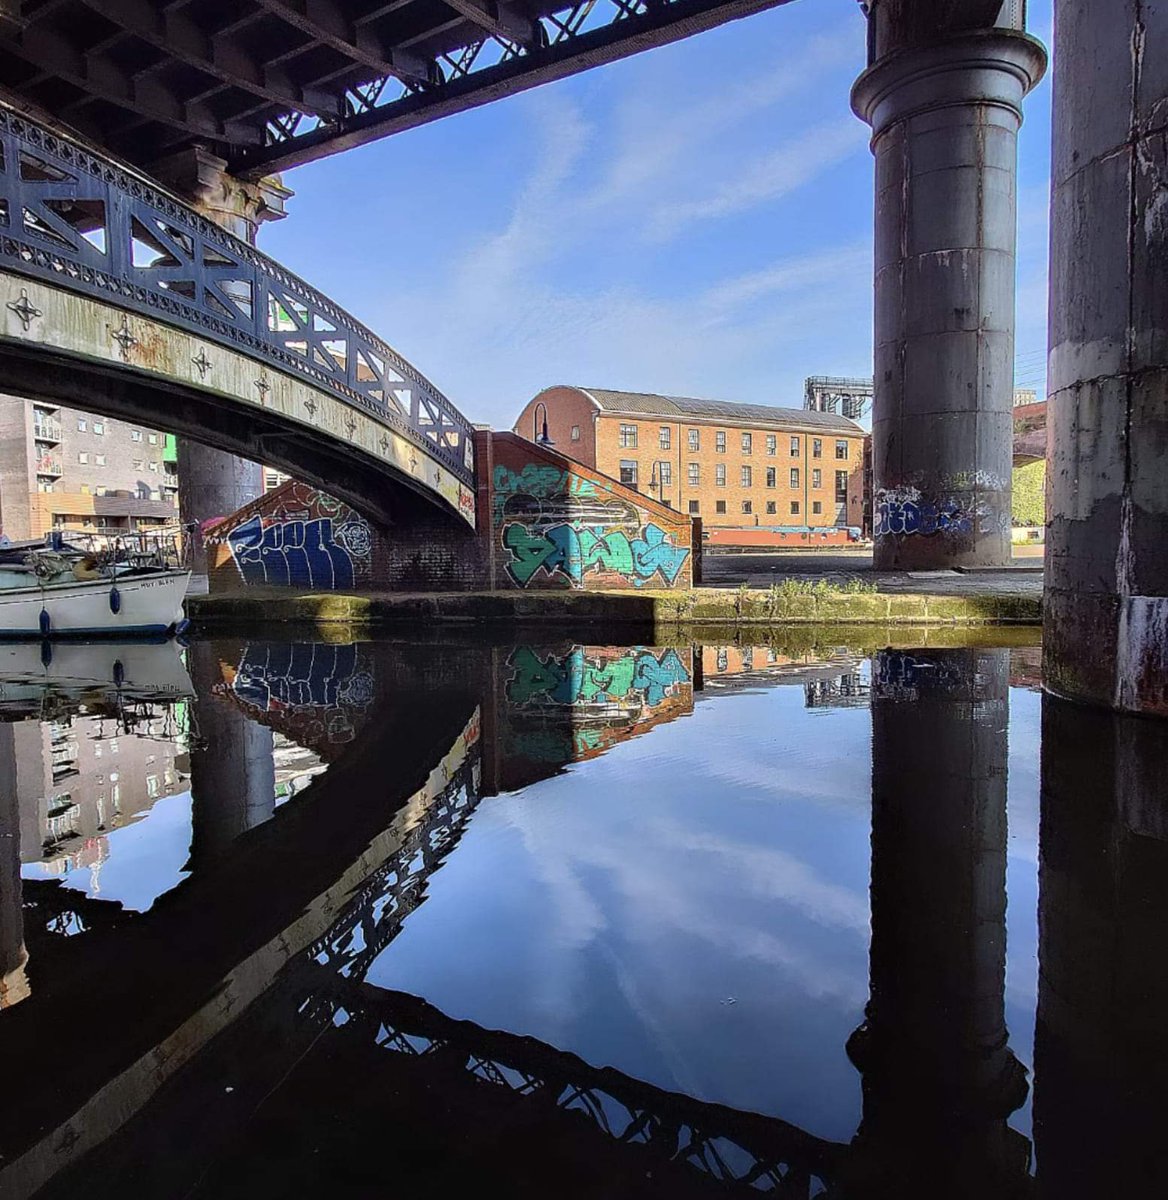 Good morning Tuesday. Reflecting on beautiful Castlefield #Manchester